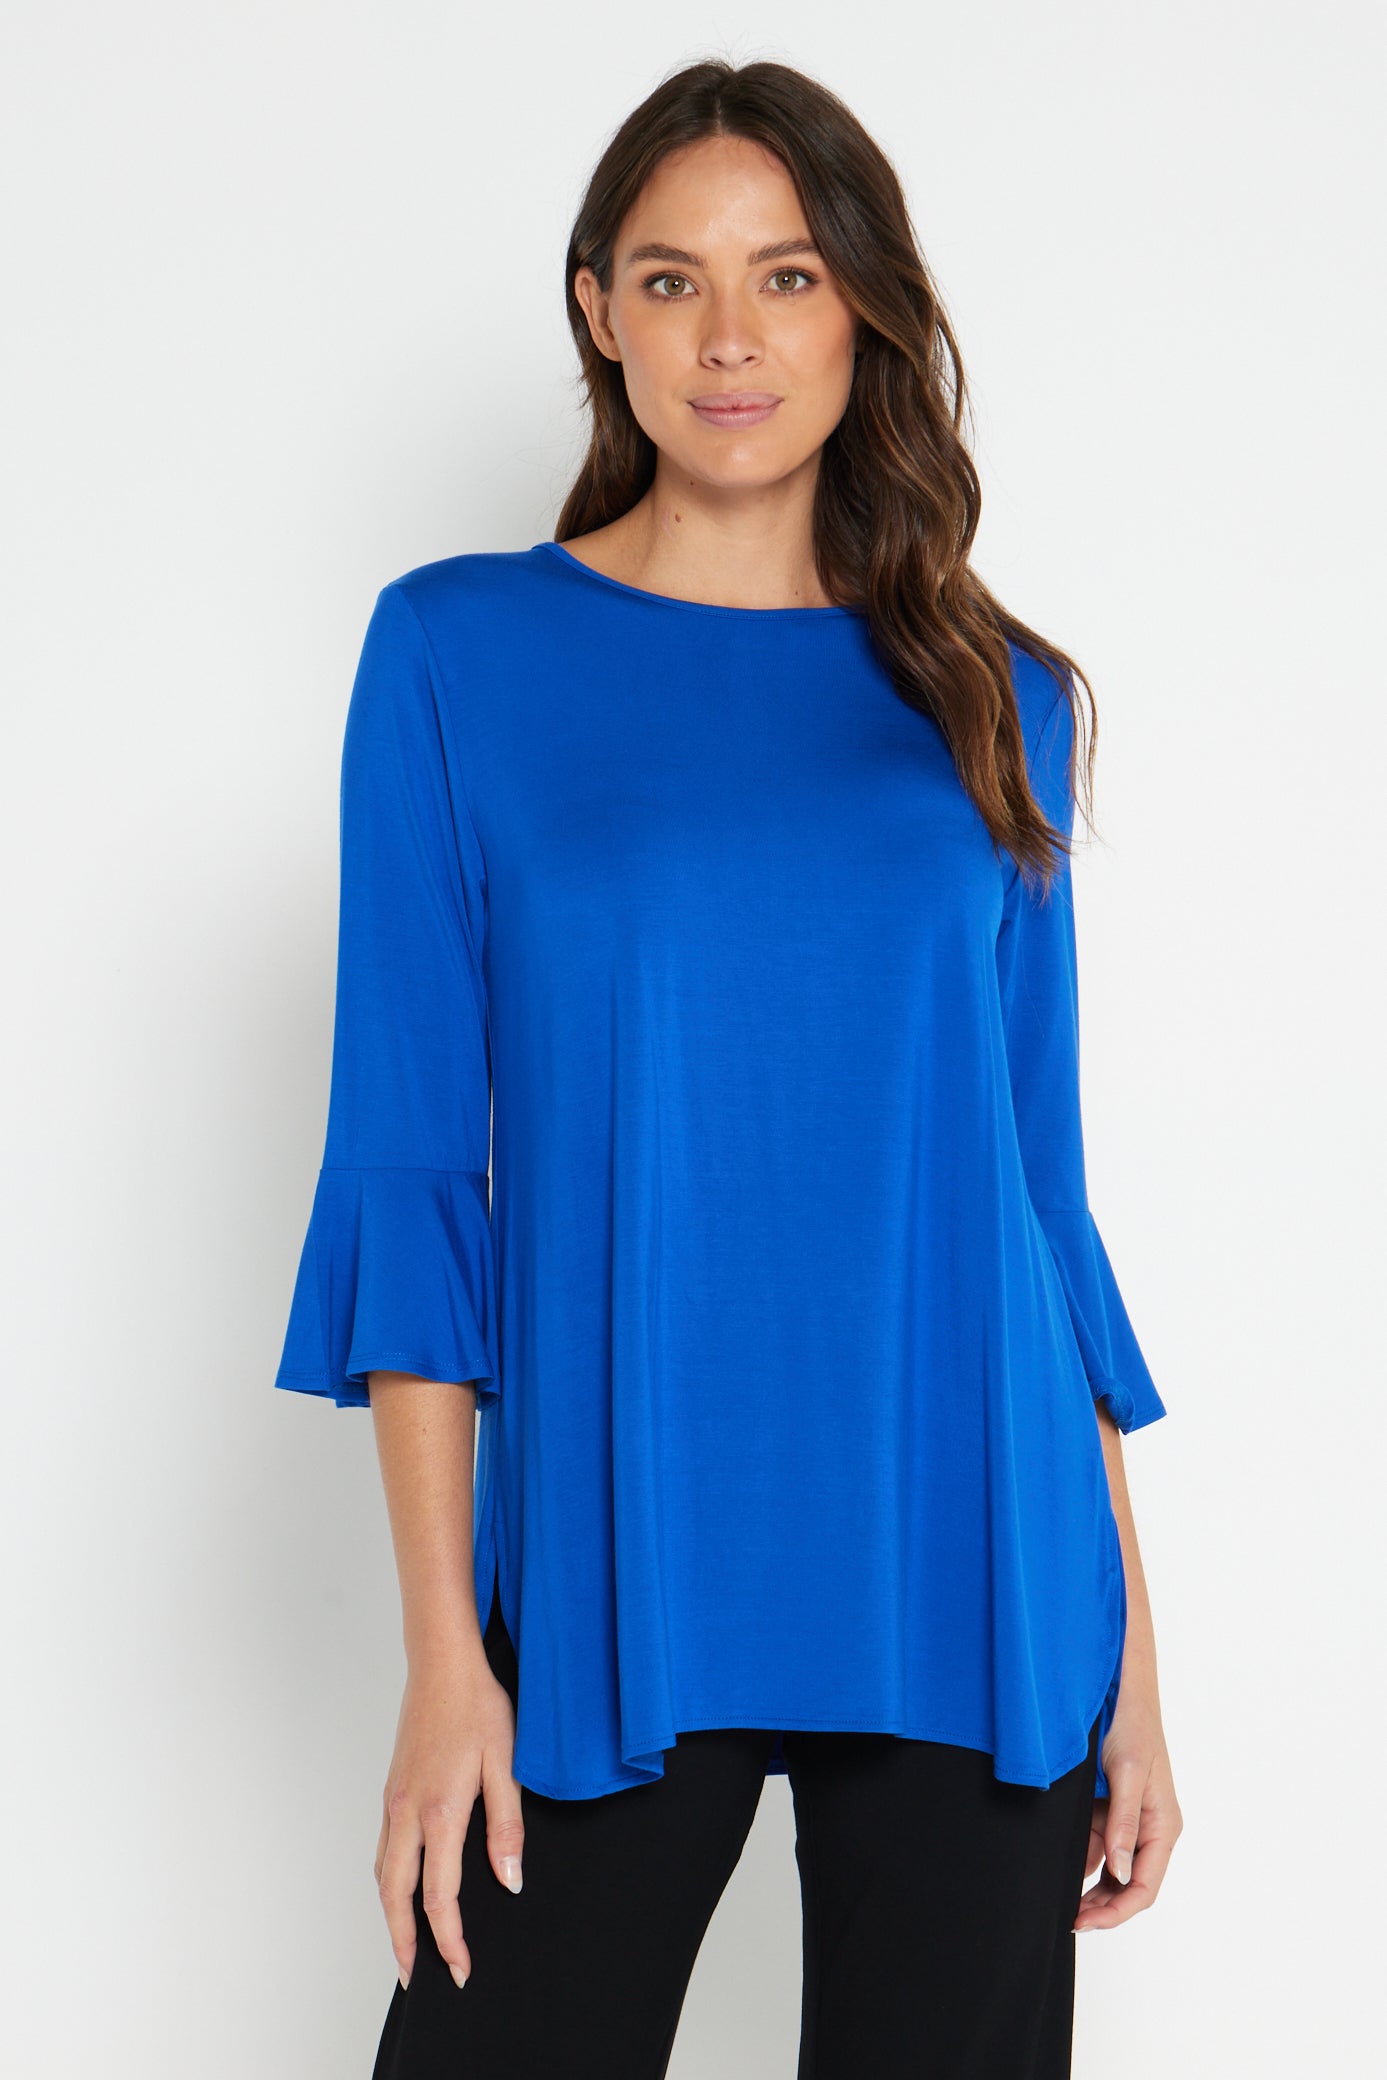 Lacey Bamboo Top - Royal Blue – TULIO Fashion